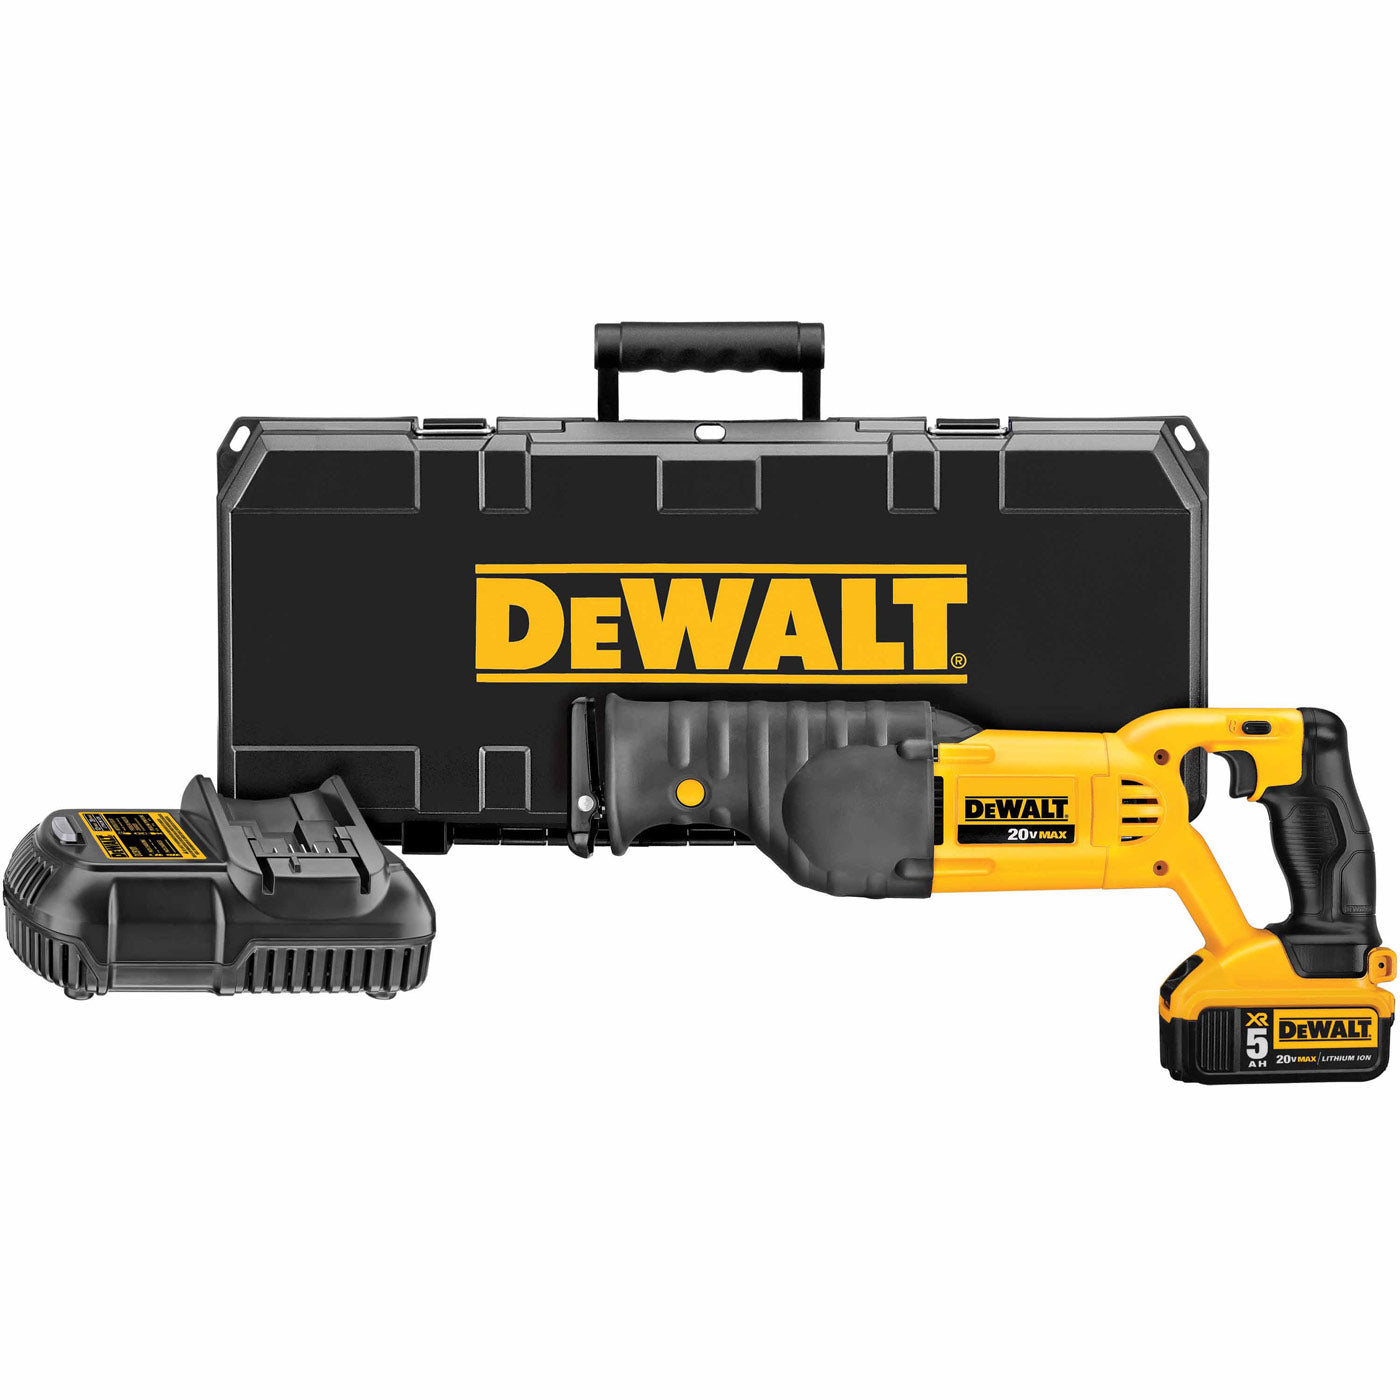 DeWalt DCS380P1 20V MAX Lithium Ion Reciprocating Saw Blade Kit With 5.0 Ah Battery